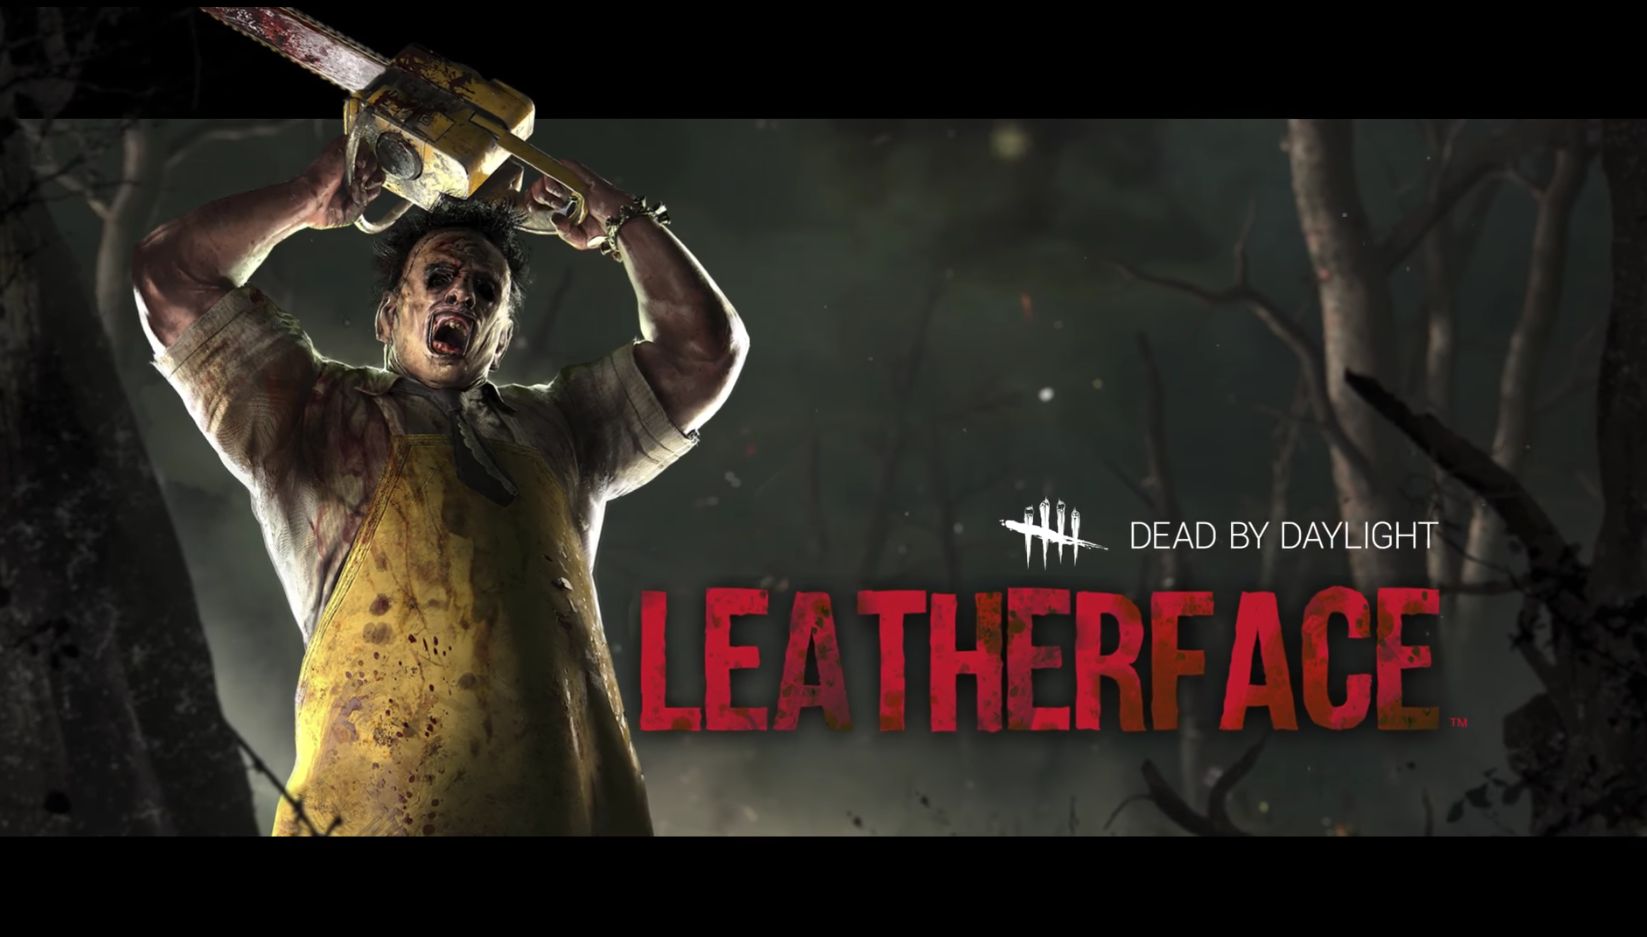 Dead by Daylight Titolo Leatherface